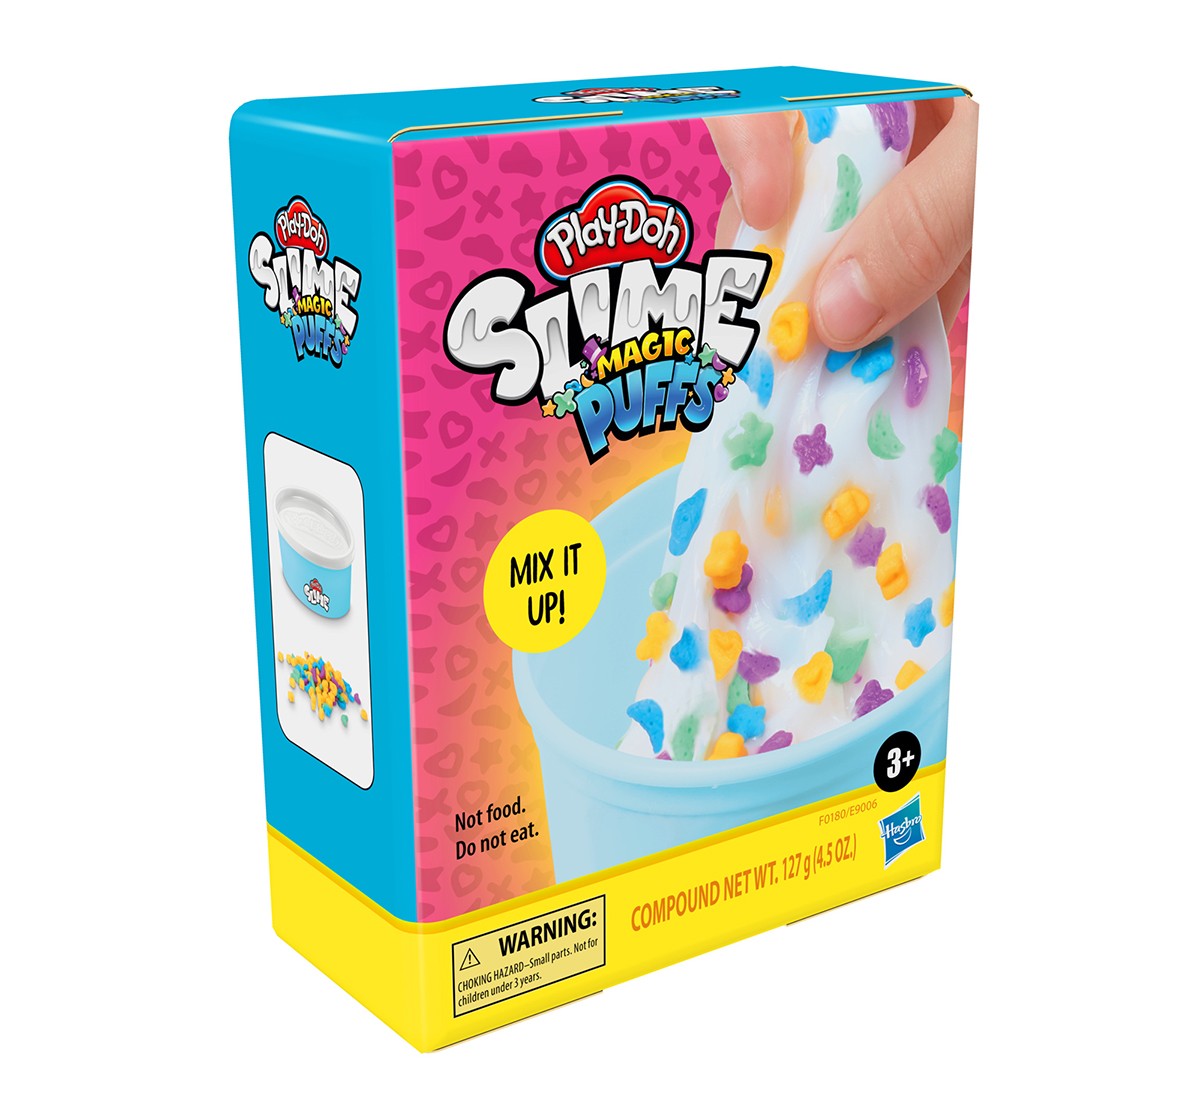 Play-Doh Slime Rainb-Os Cereal Themed Slime Compound Assorted for Kids 3 Years and Up, 4.5-ounce Can with Plastic Cereal Bits, Non-Toxic Sand, Slime & Others for Kids age 3Y+ 